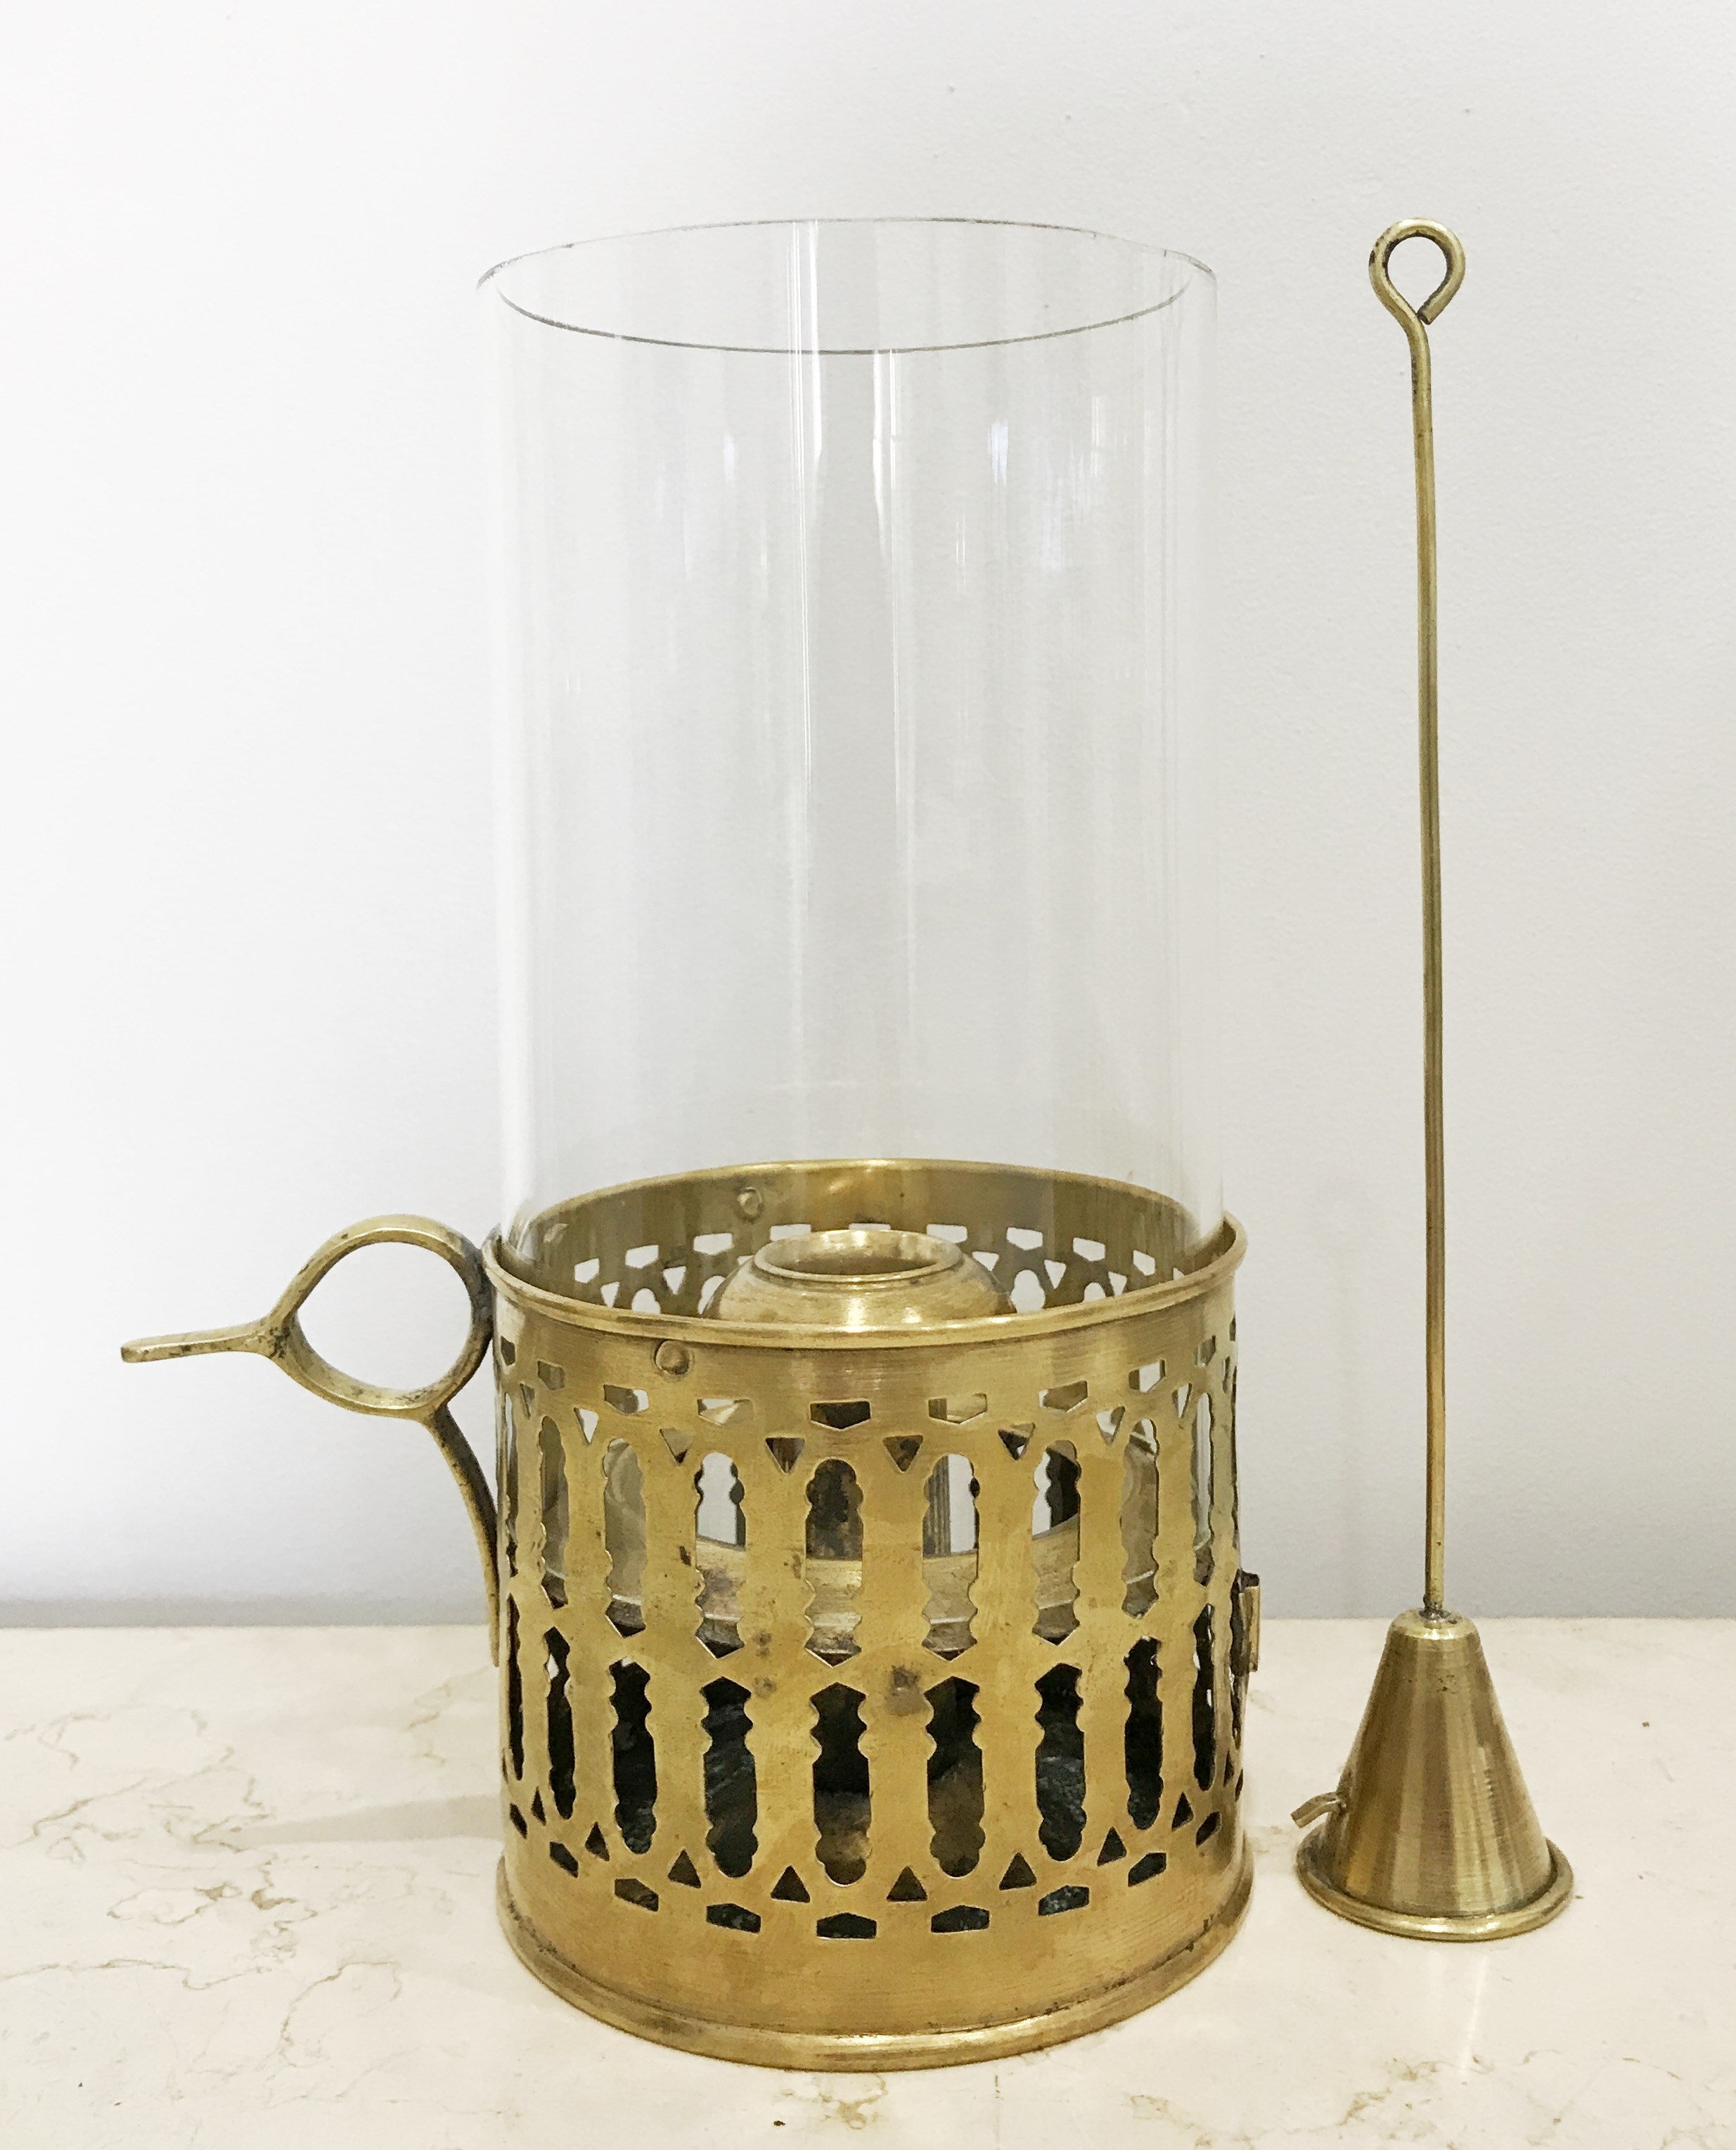 Ornate Brass Candle Lantern Holder | eXibit collection